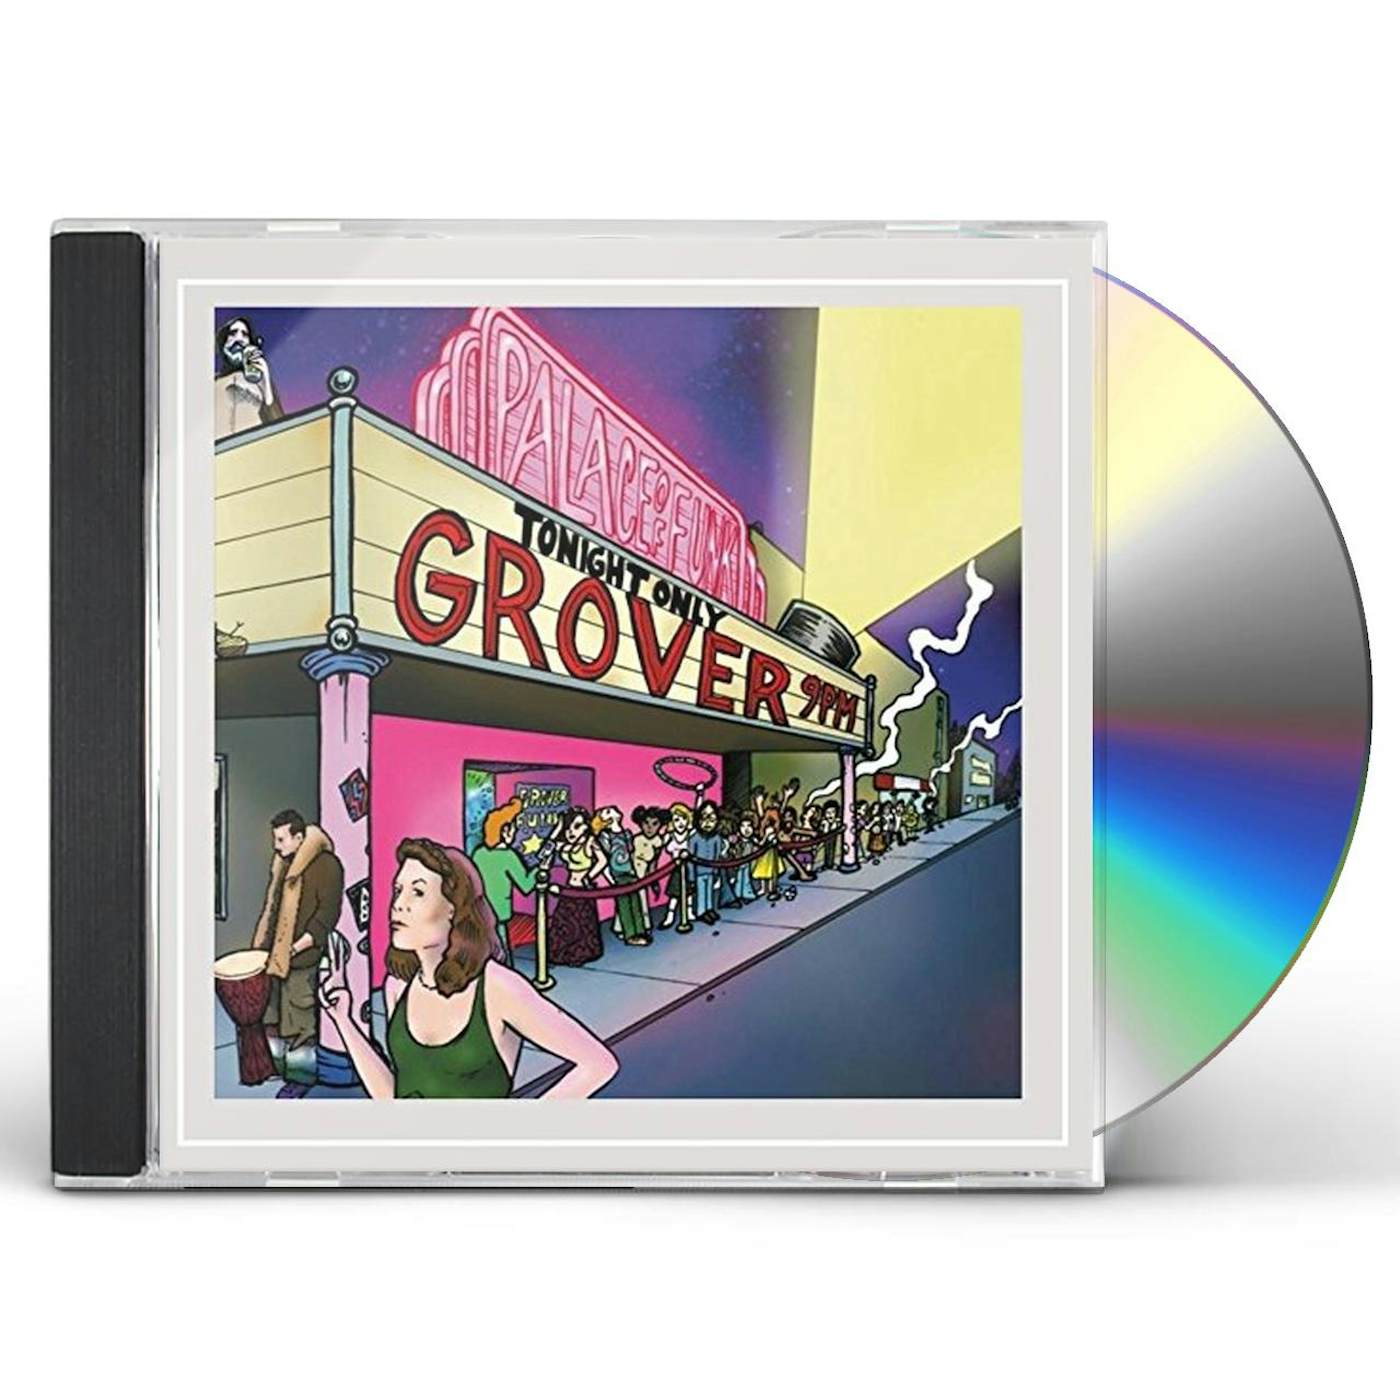 Grover TONIGHT ONLY CD